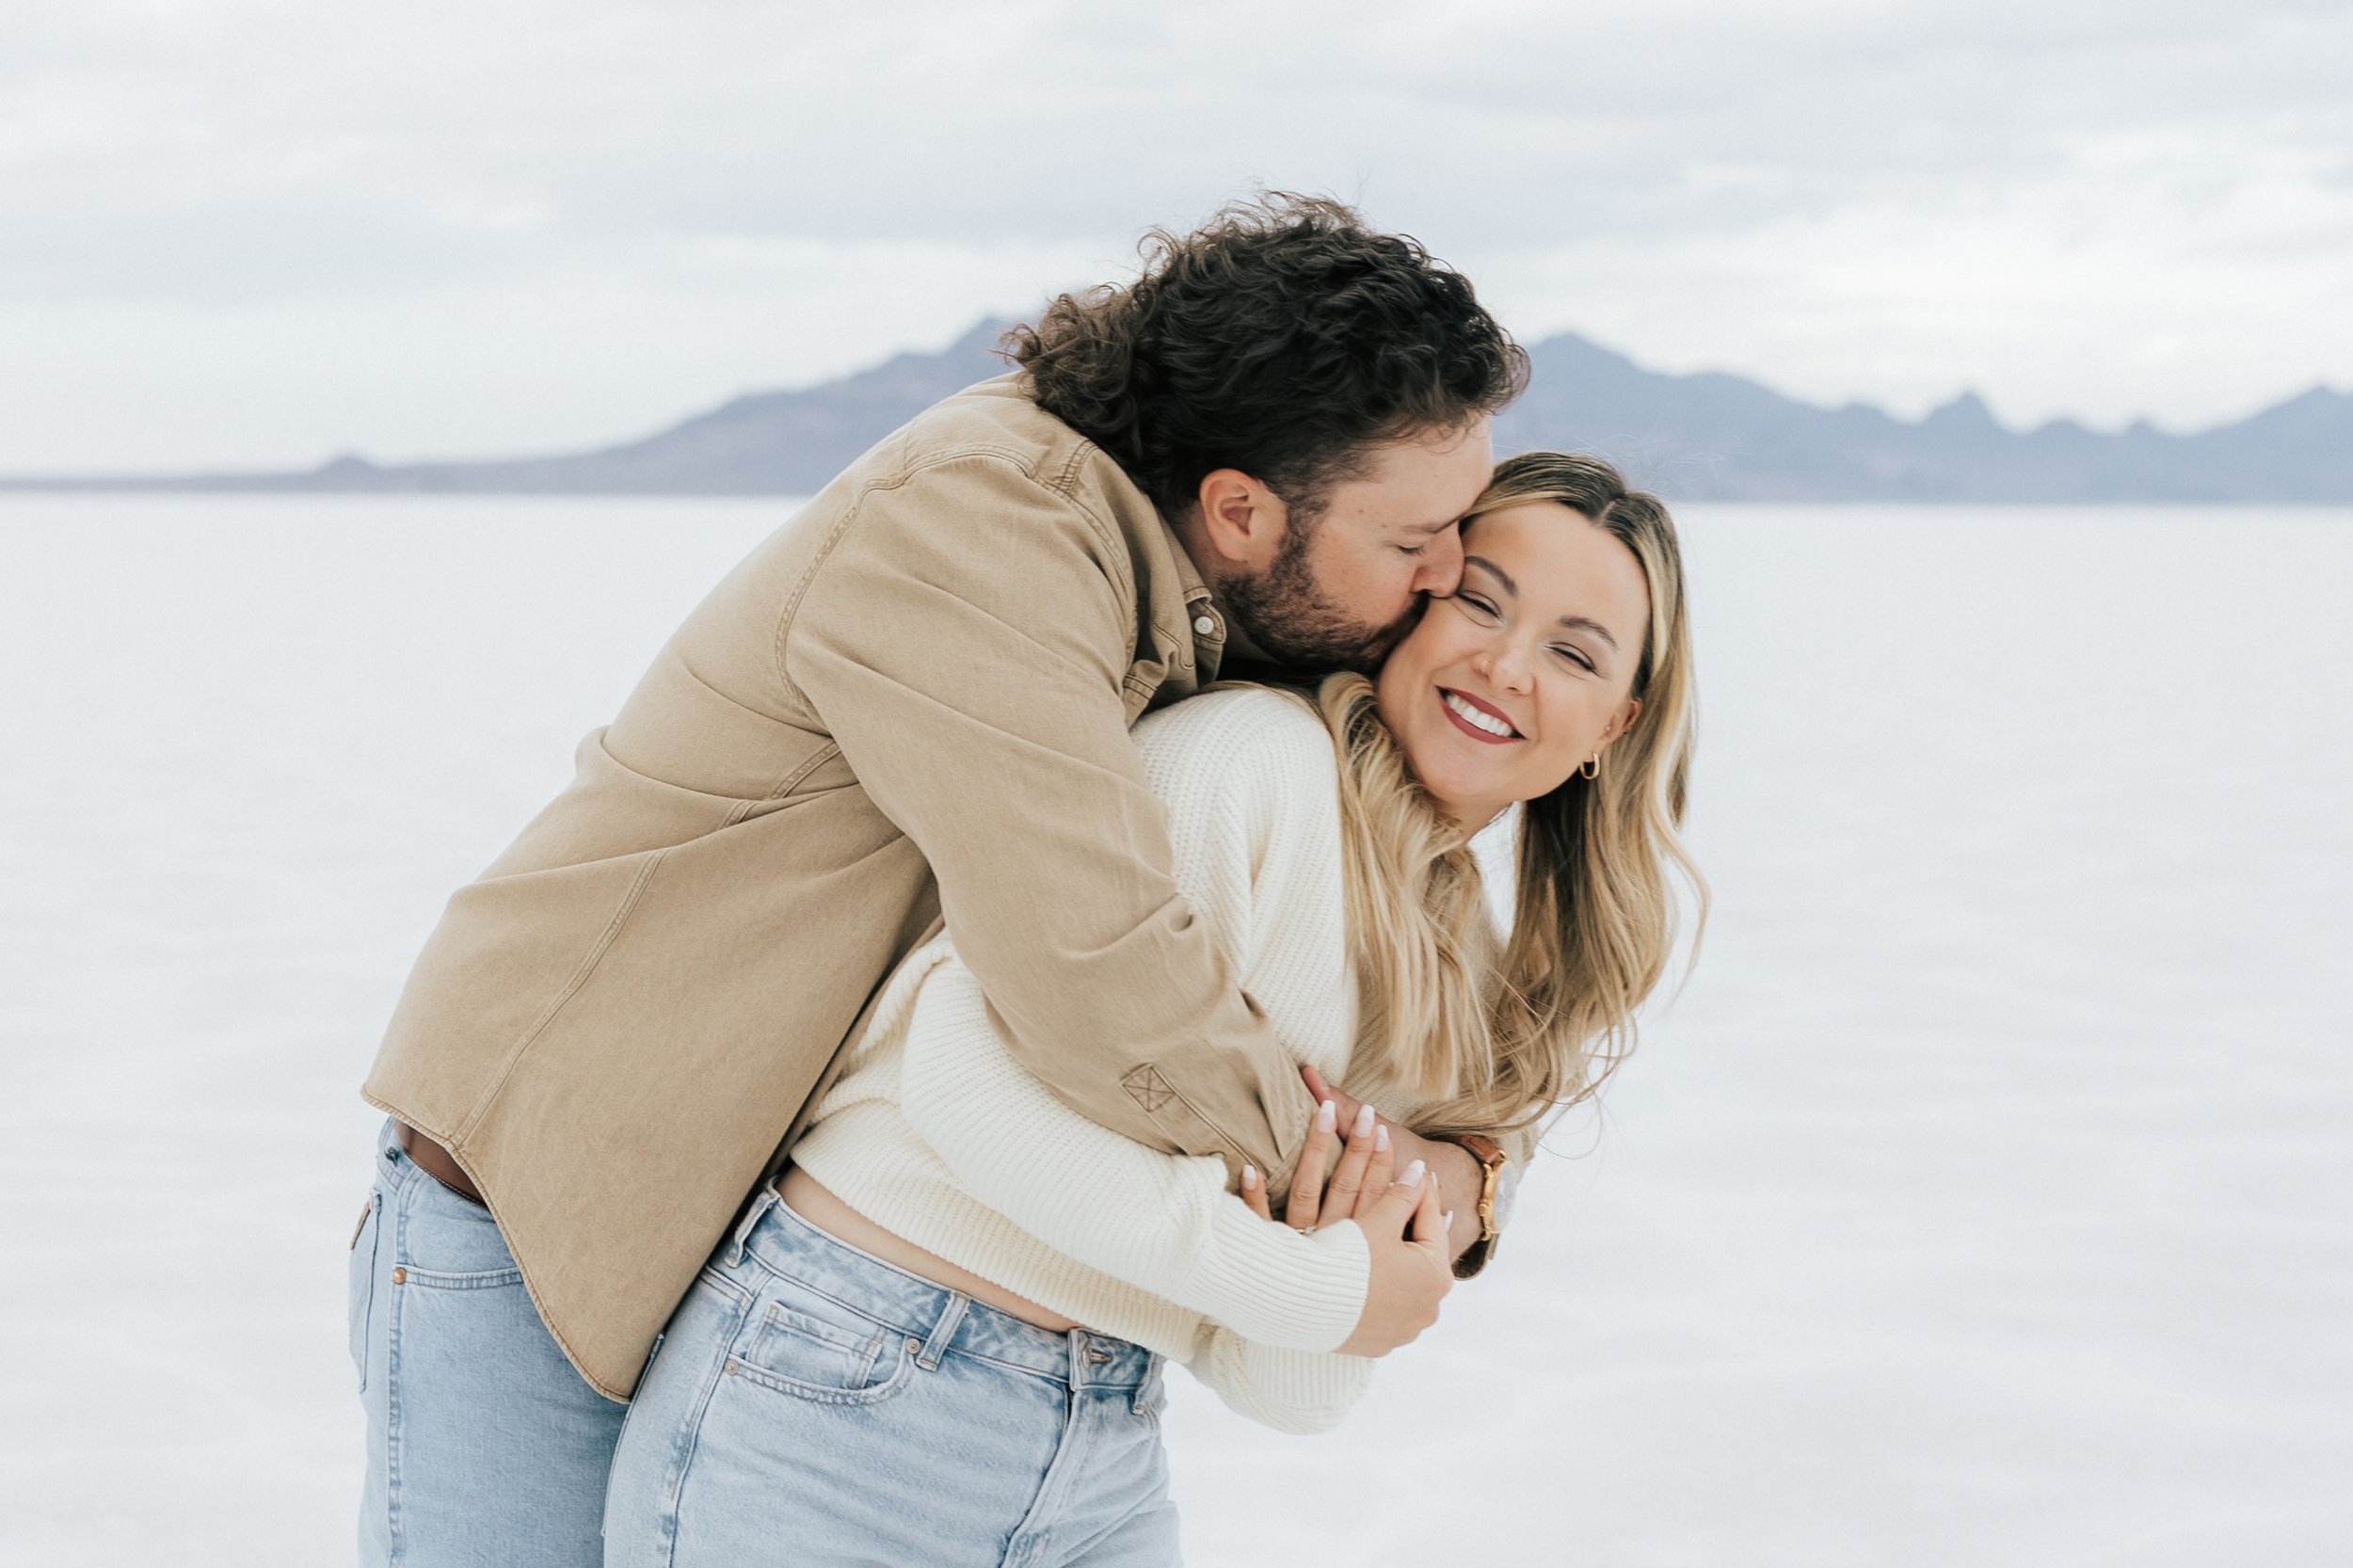  An engaged couple laughs and hugs as they pose for a photo at the Bonneville Salt Flats near Wendover, Nevada and Salt Lake City, Utah. Man kisses his fiance on the cheek. The Salt Flats are white and the sky is overcast. The mountains show behind. 